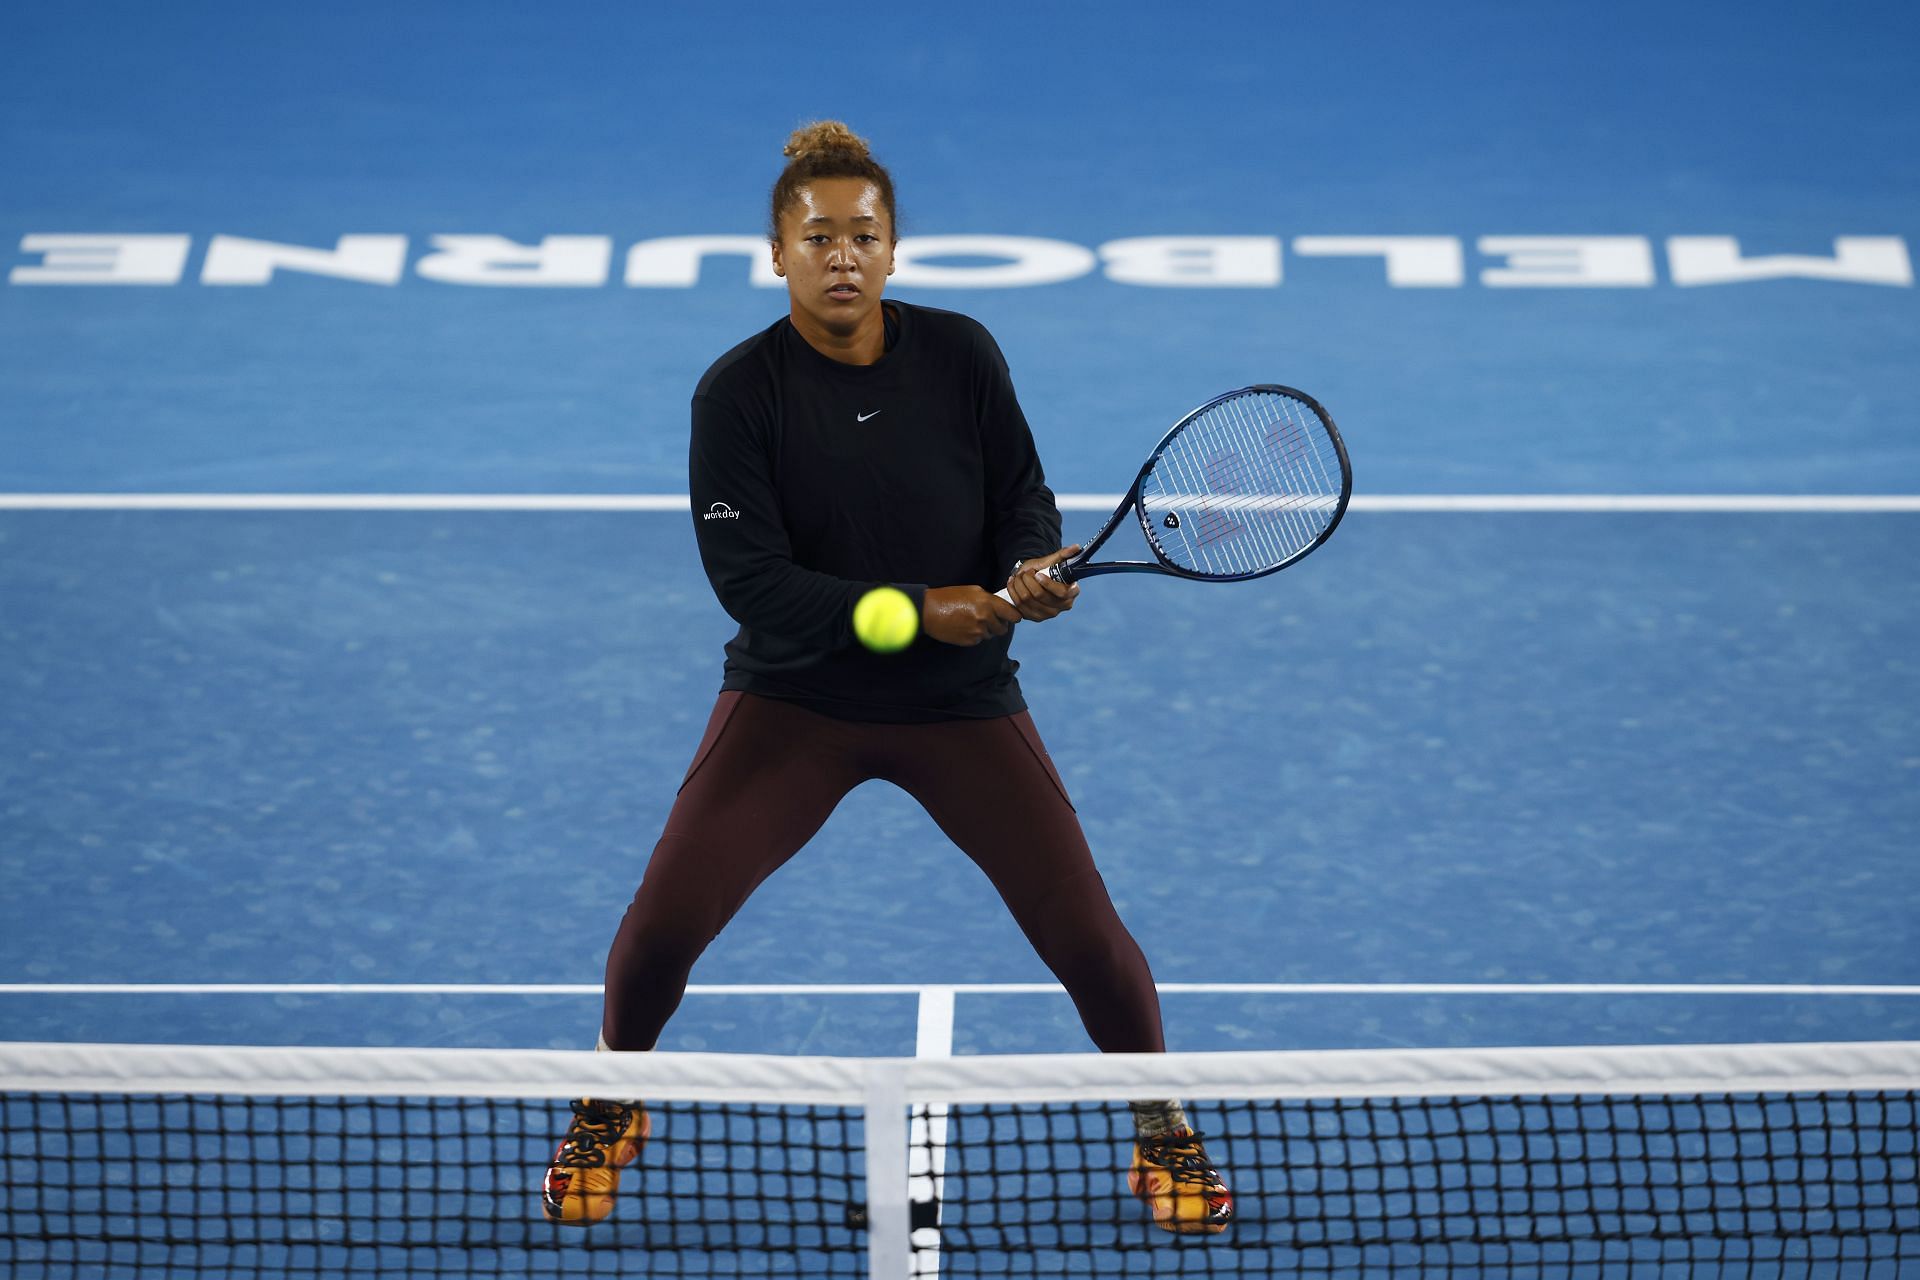 Naomi Osaka begins her Australian Open campaign against Camila Osorio in the first round